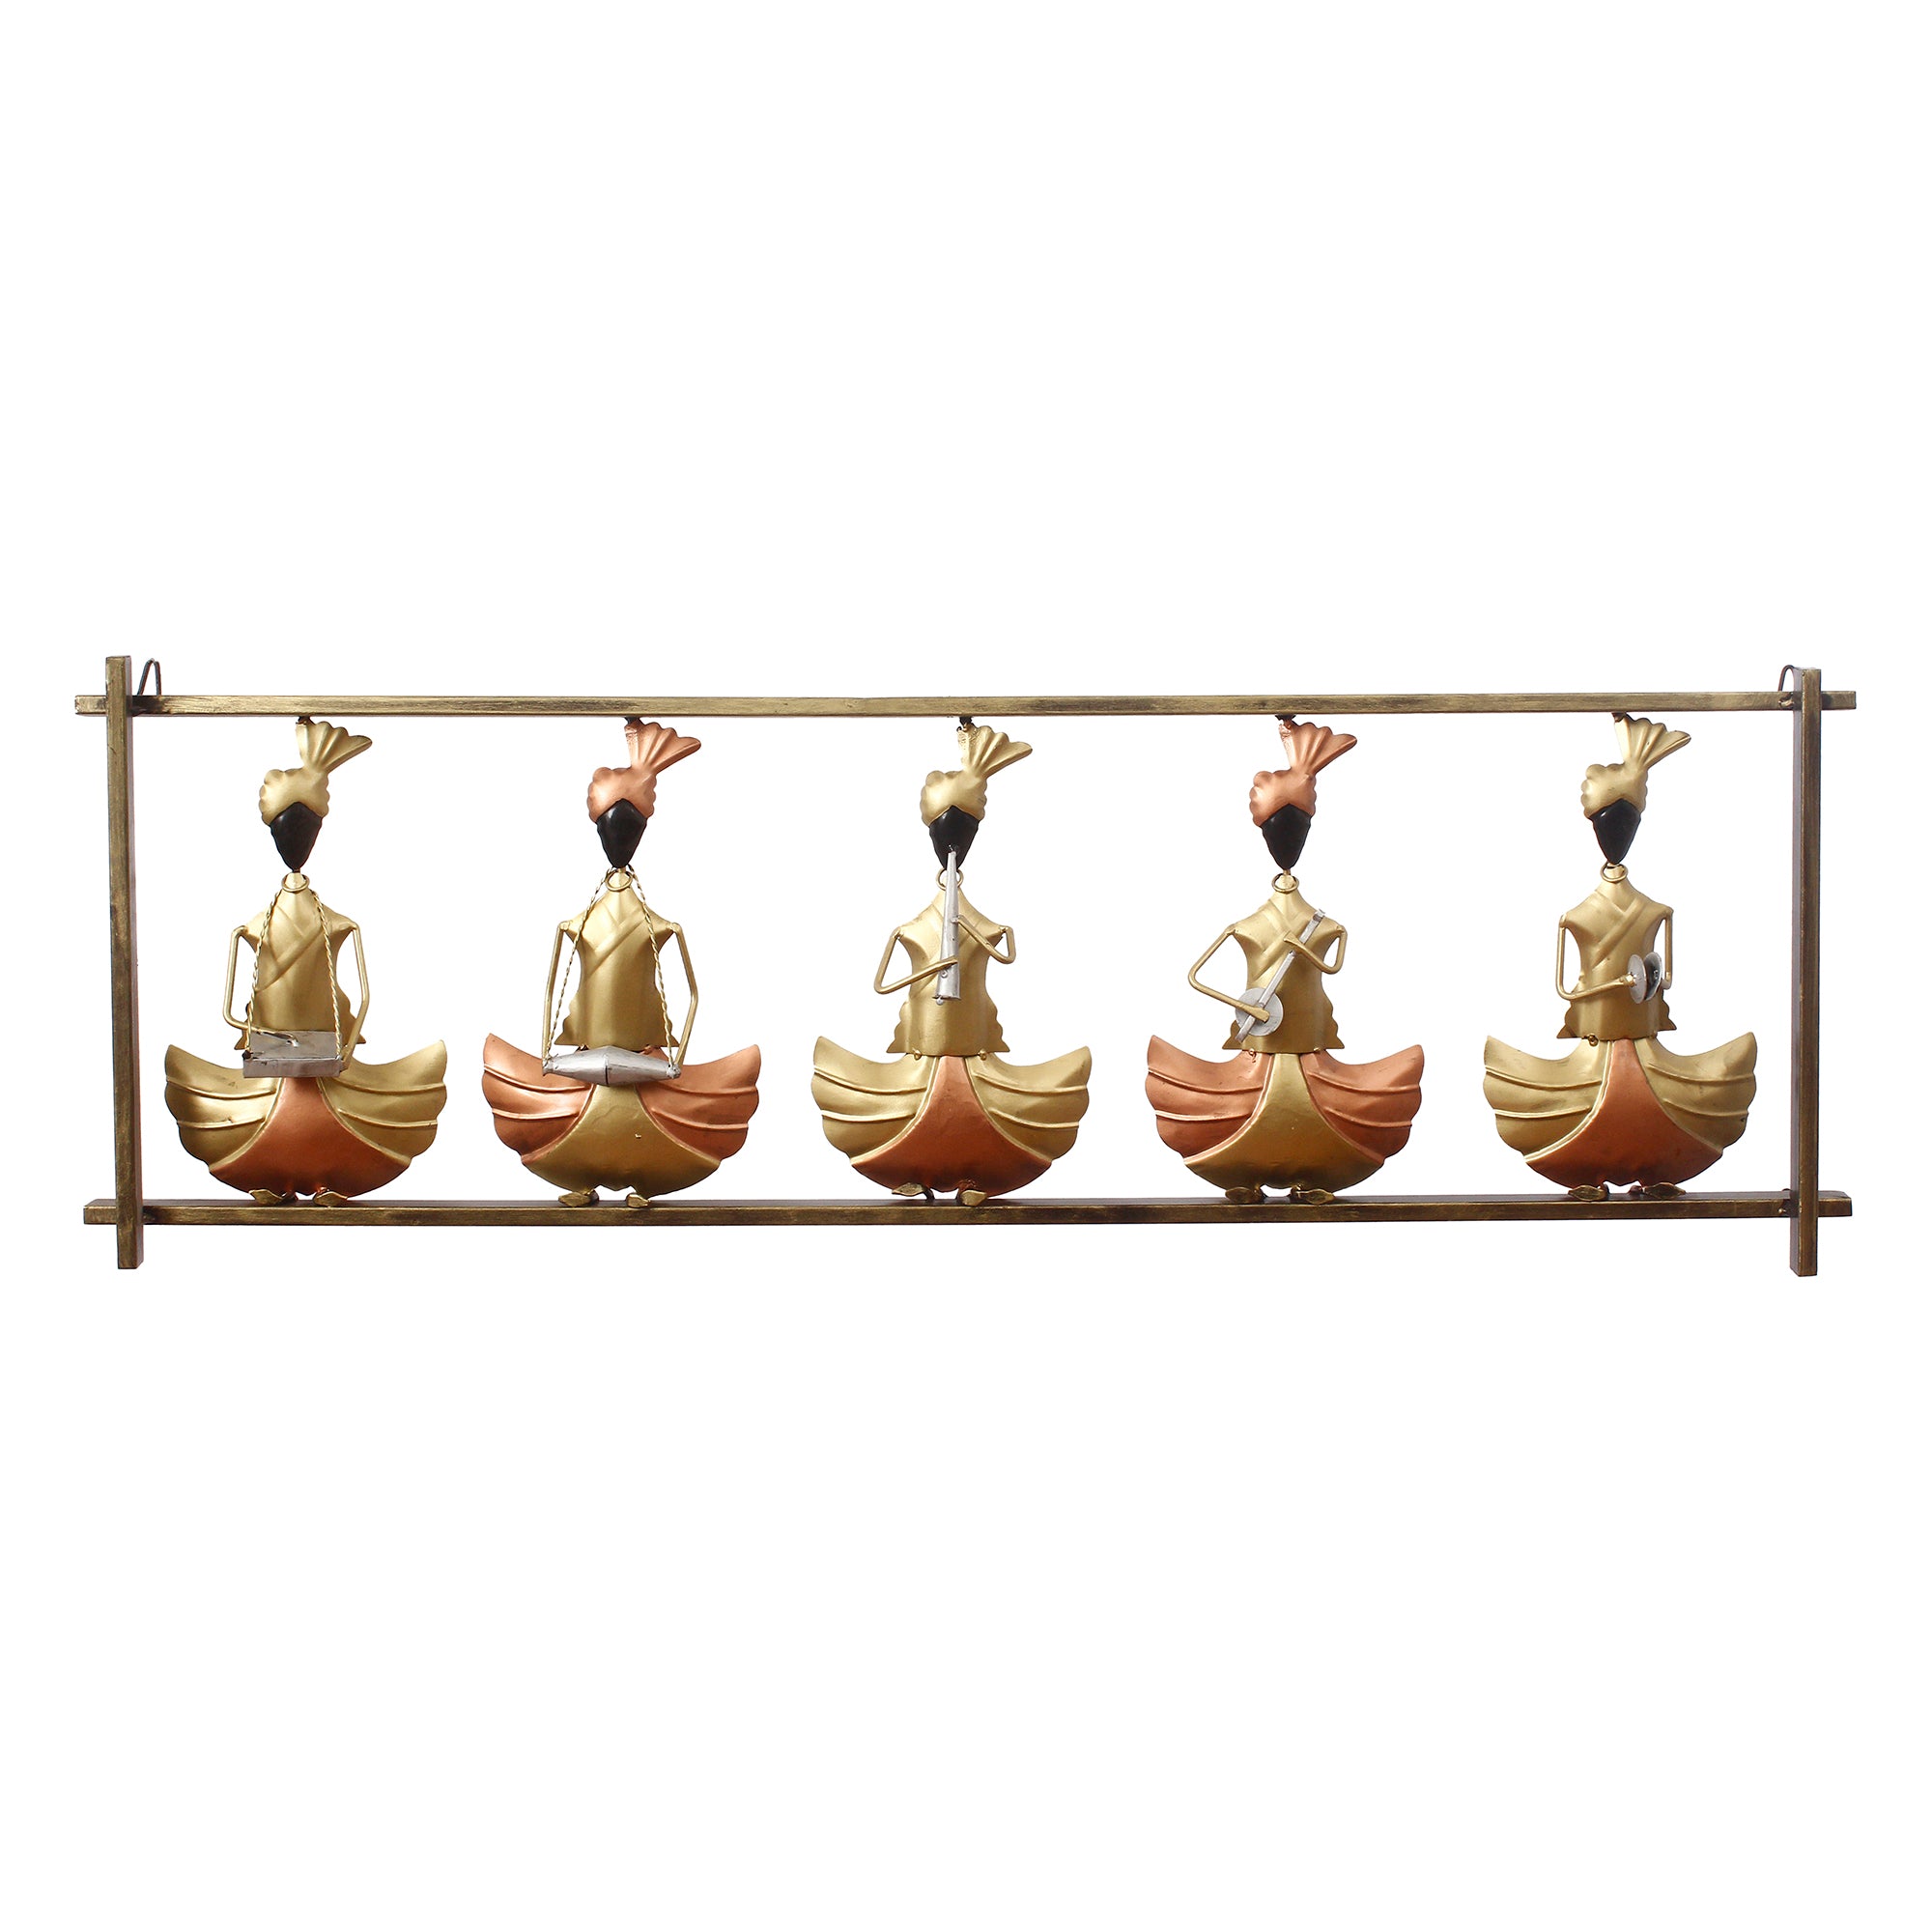 Golden Set of 5 Tribal Playing Different Musical Instruments Decorative Iron Wall Hanging 2